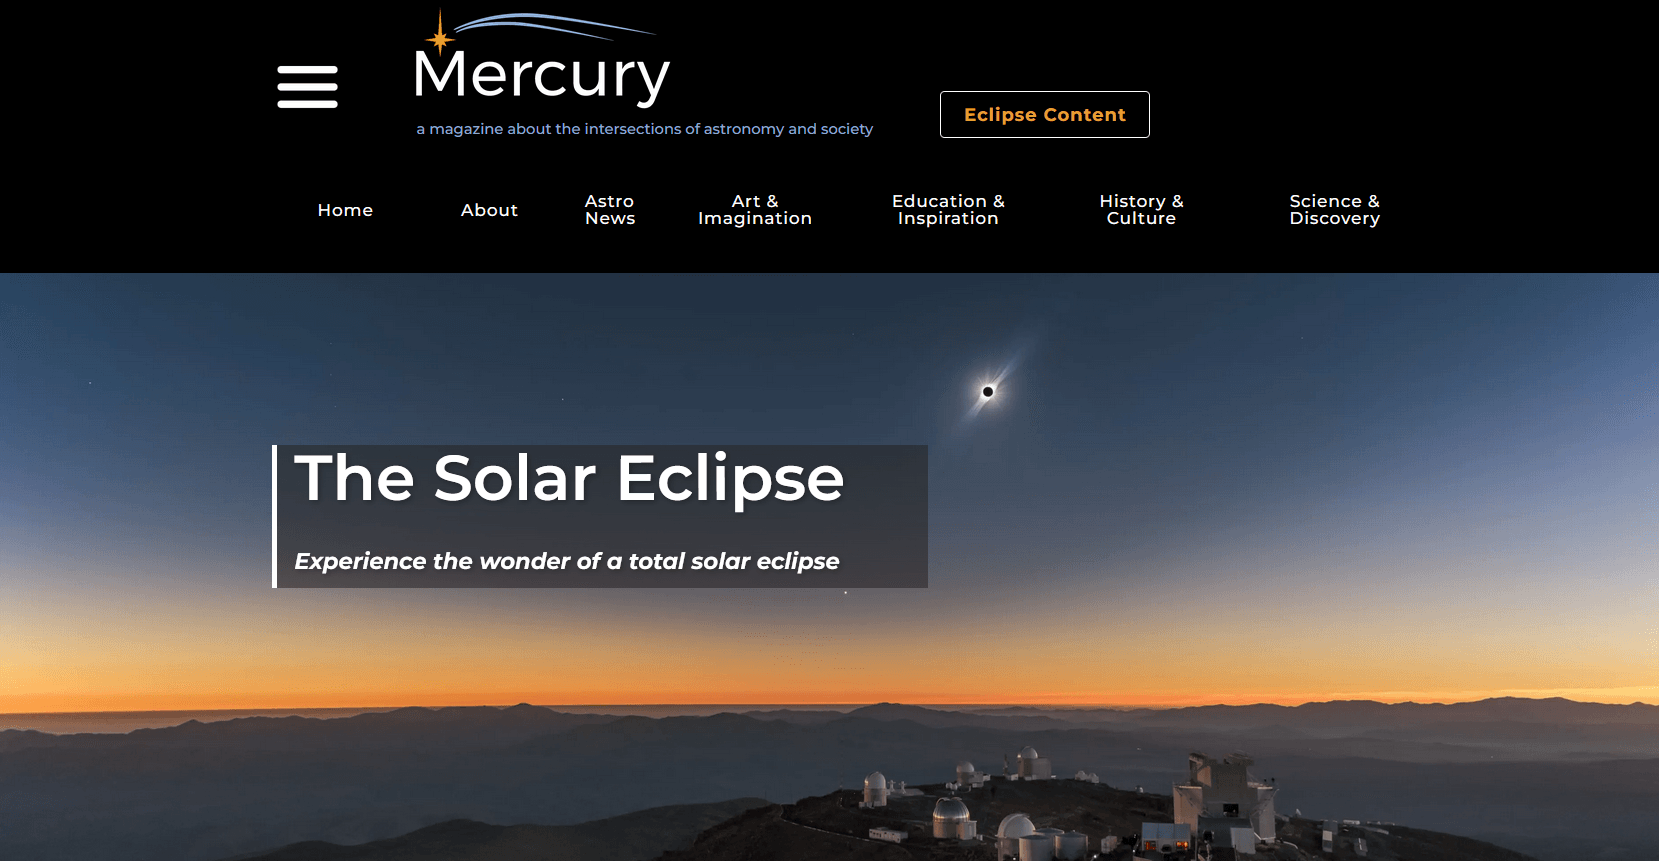 Mercury Magazine Celebrates Totality with Special 20% Subscription Savings through 4/15!